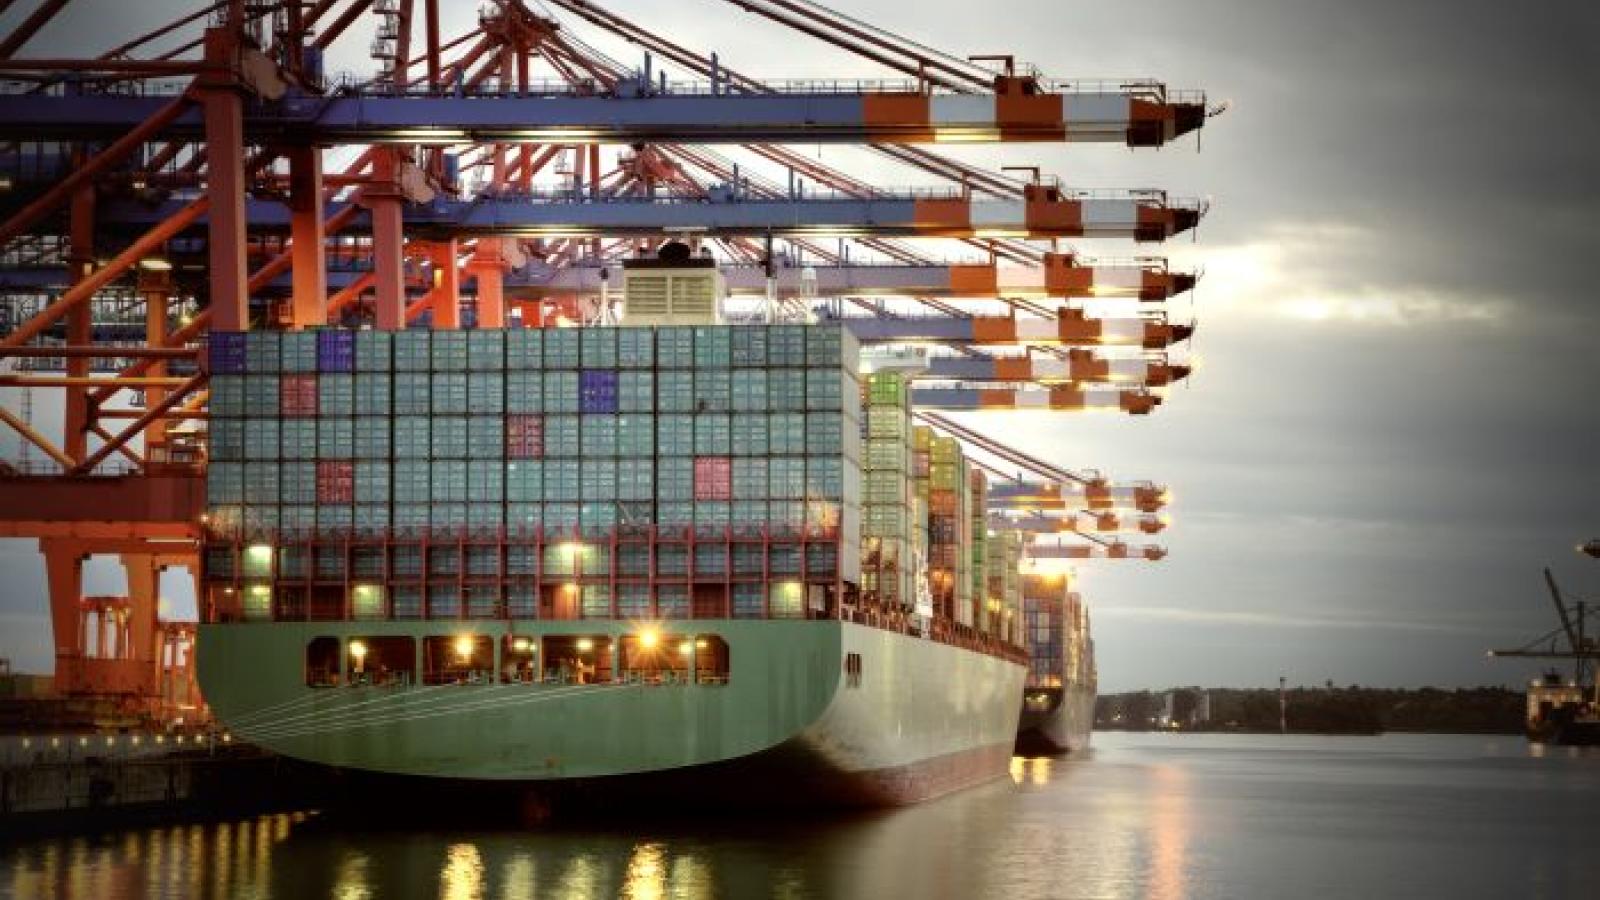 Detention, demurrage fees doubled in 2021: report